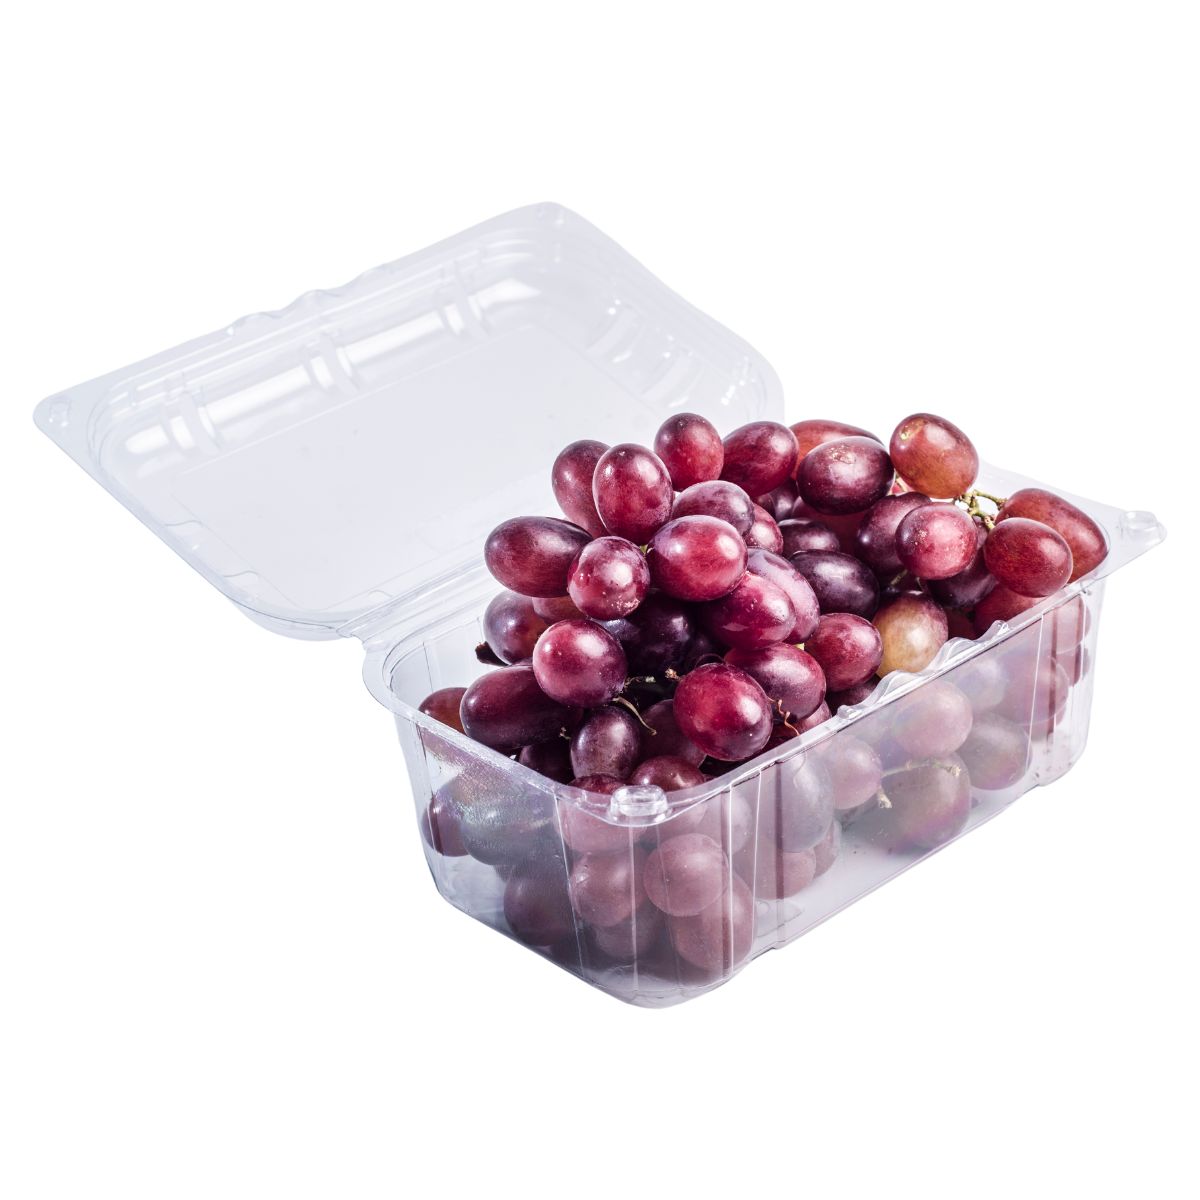 A clear plastic container filled with Red Grapes Pack - 500g, perfect for snacking, on a white background.